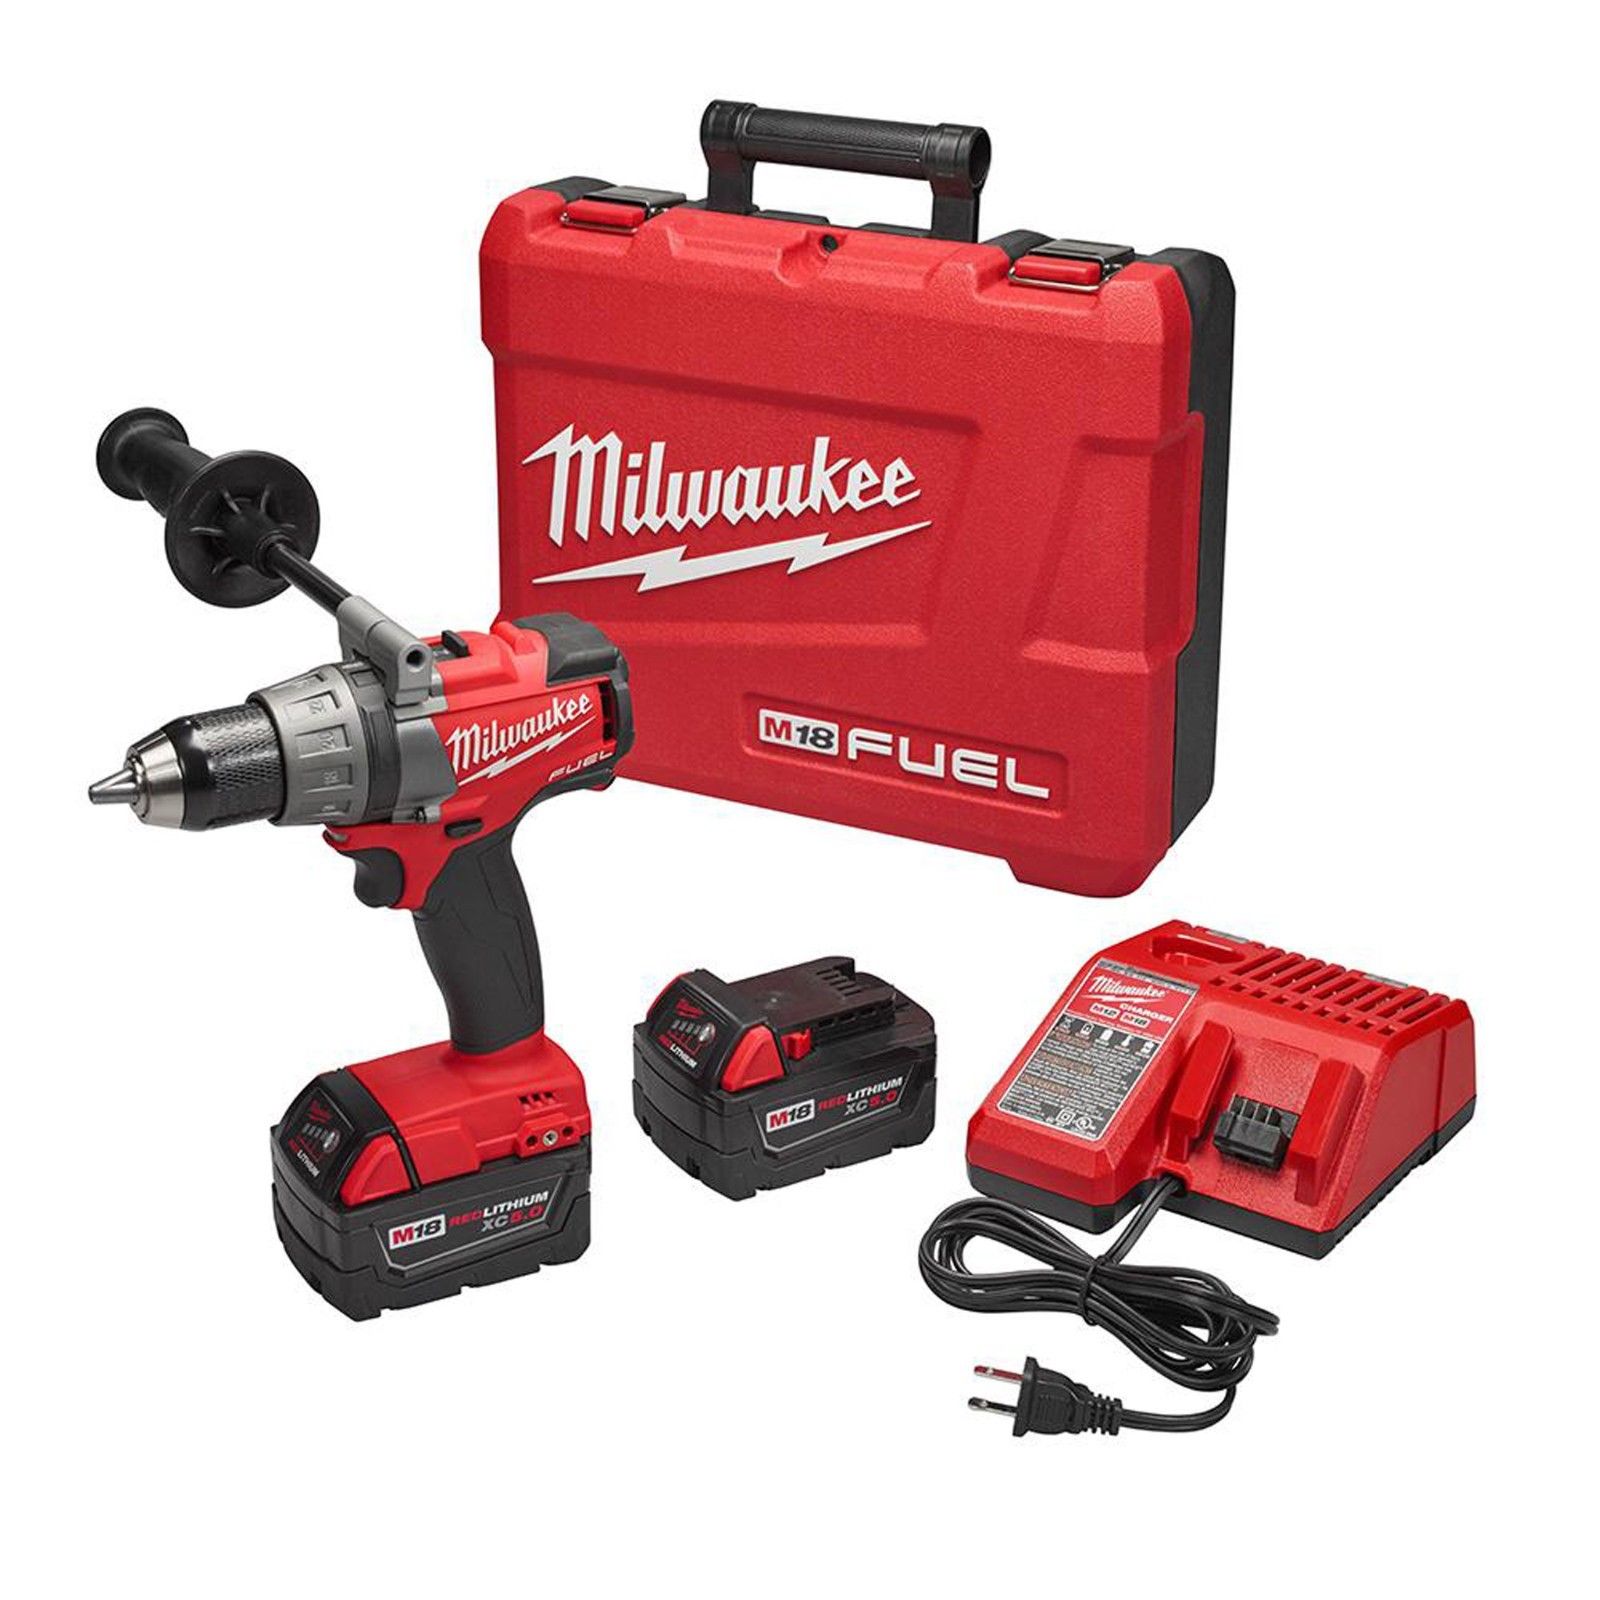 Milwaukee M18 Fuel 18-volt Lithium-ion Brushless Cordless Red Drill ...